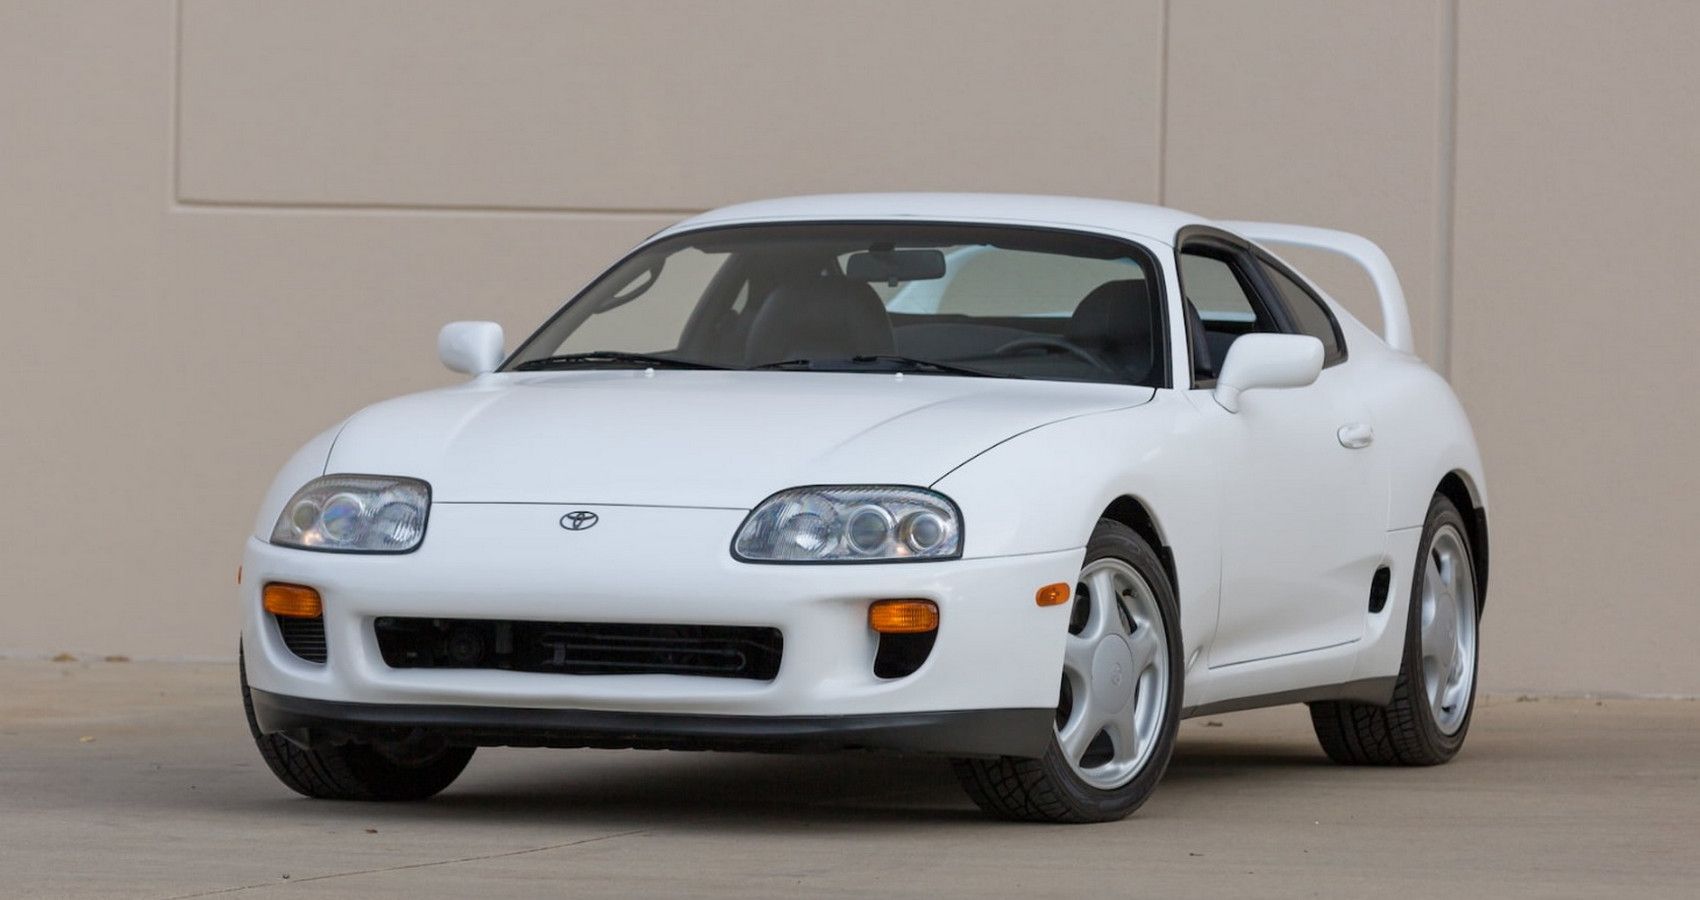 Toyota Supra A80 - Front